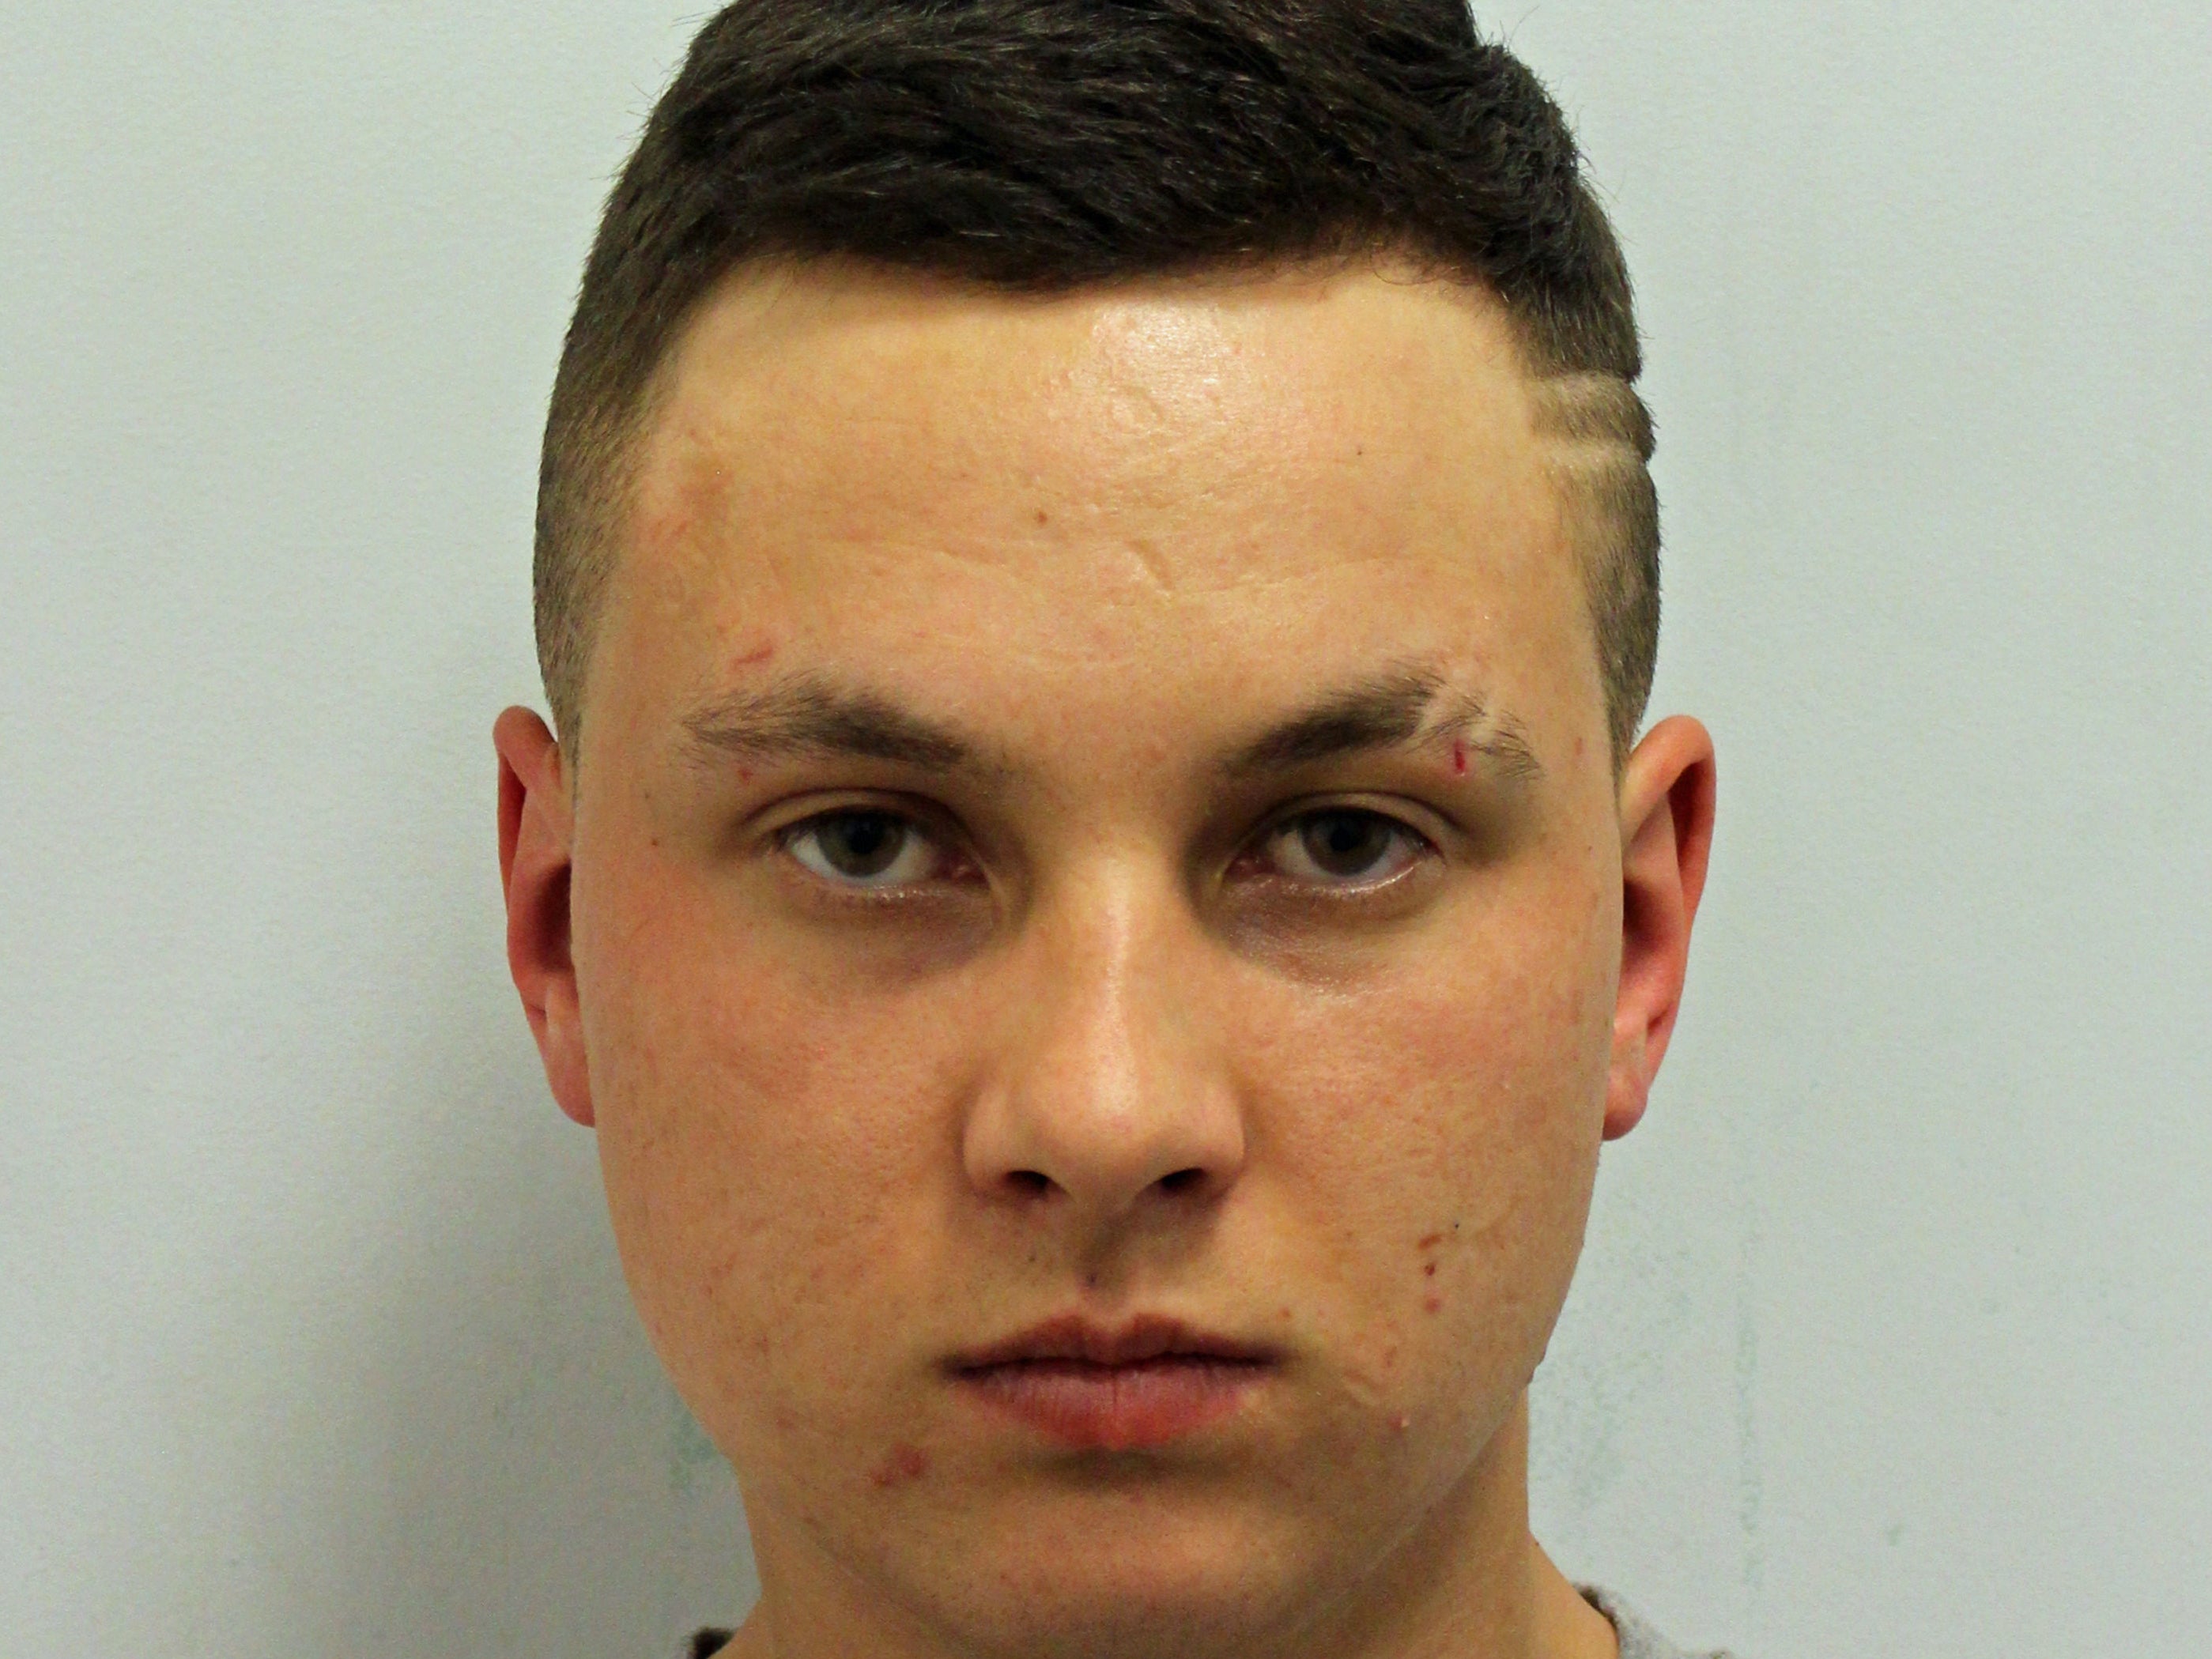 Valentin Lazar has been jailed for a minimum of 23 years